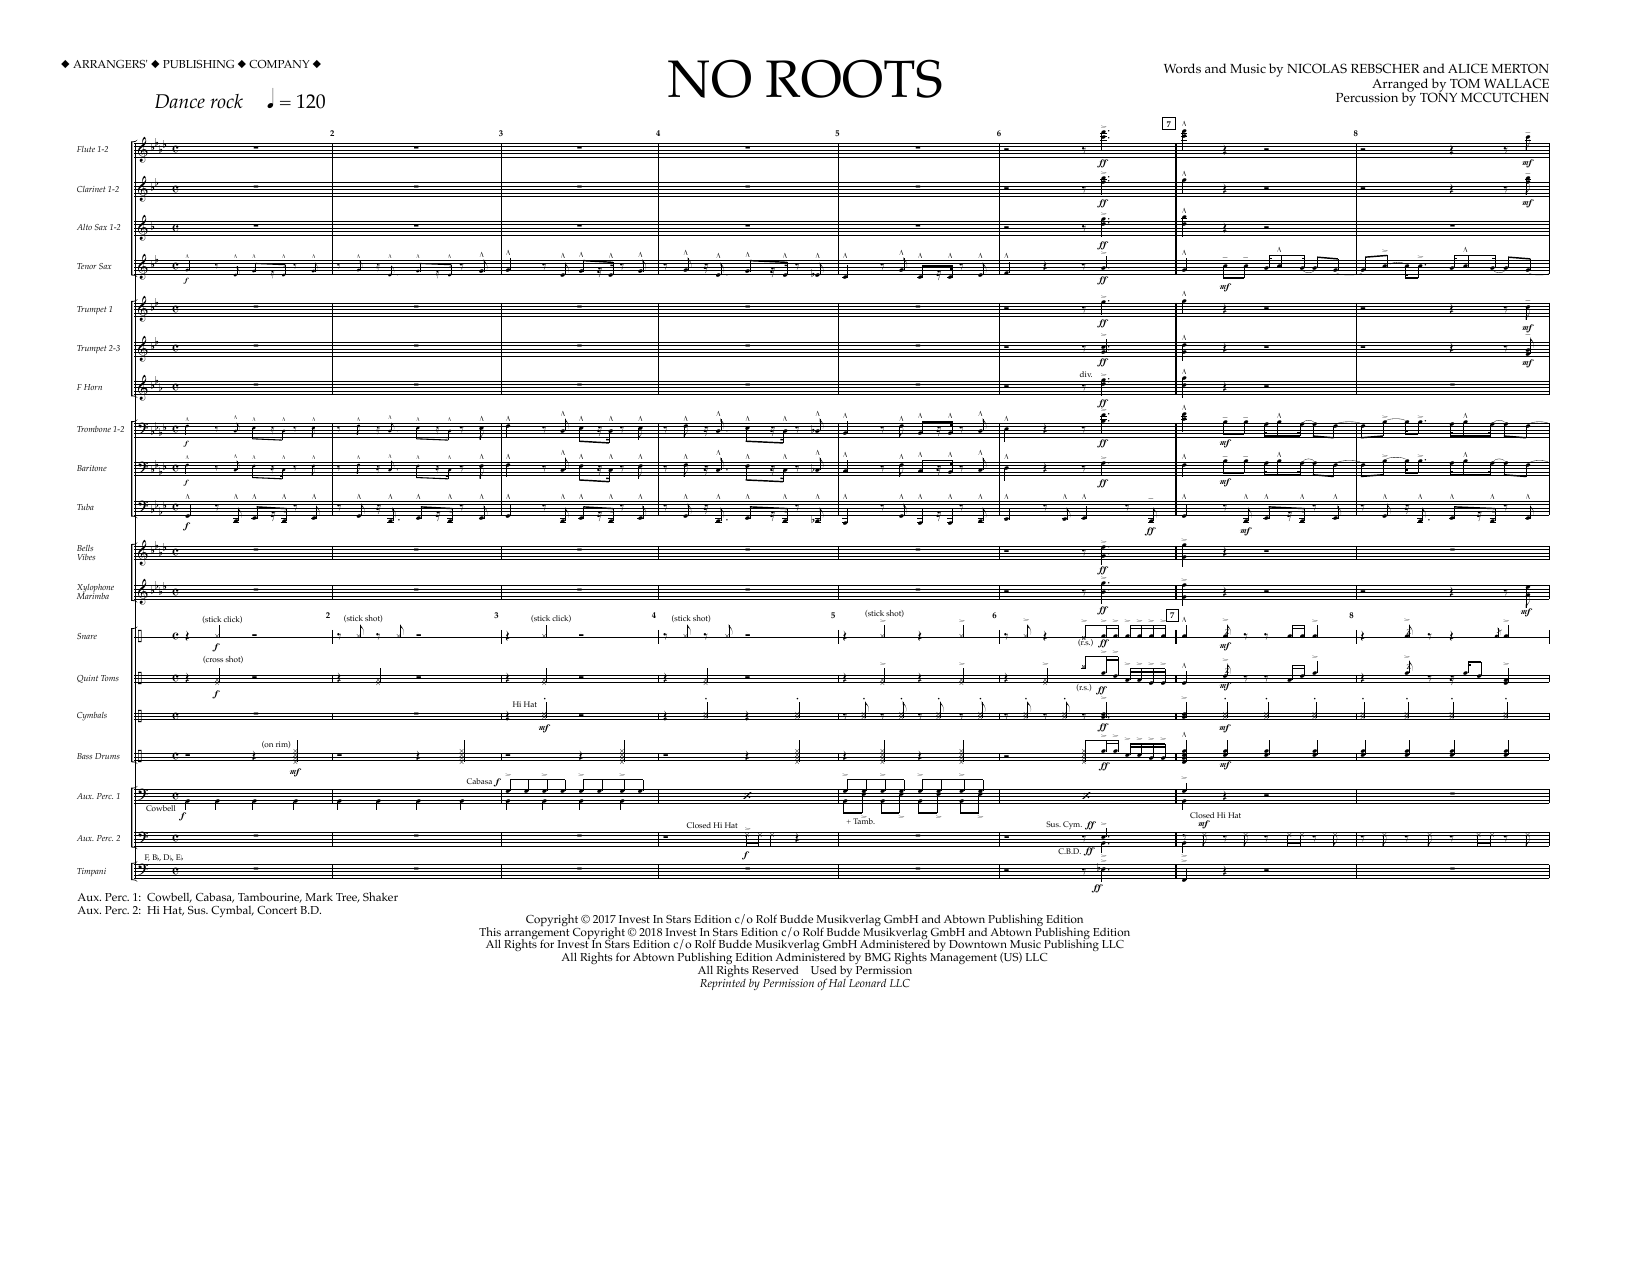 Download Tom Wallace No Roots - Full Score Sheet Music